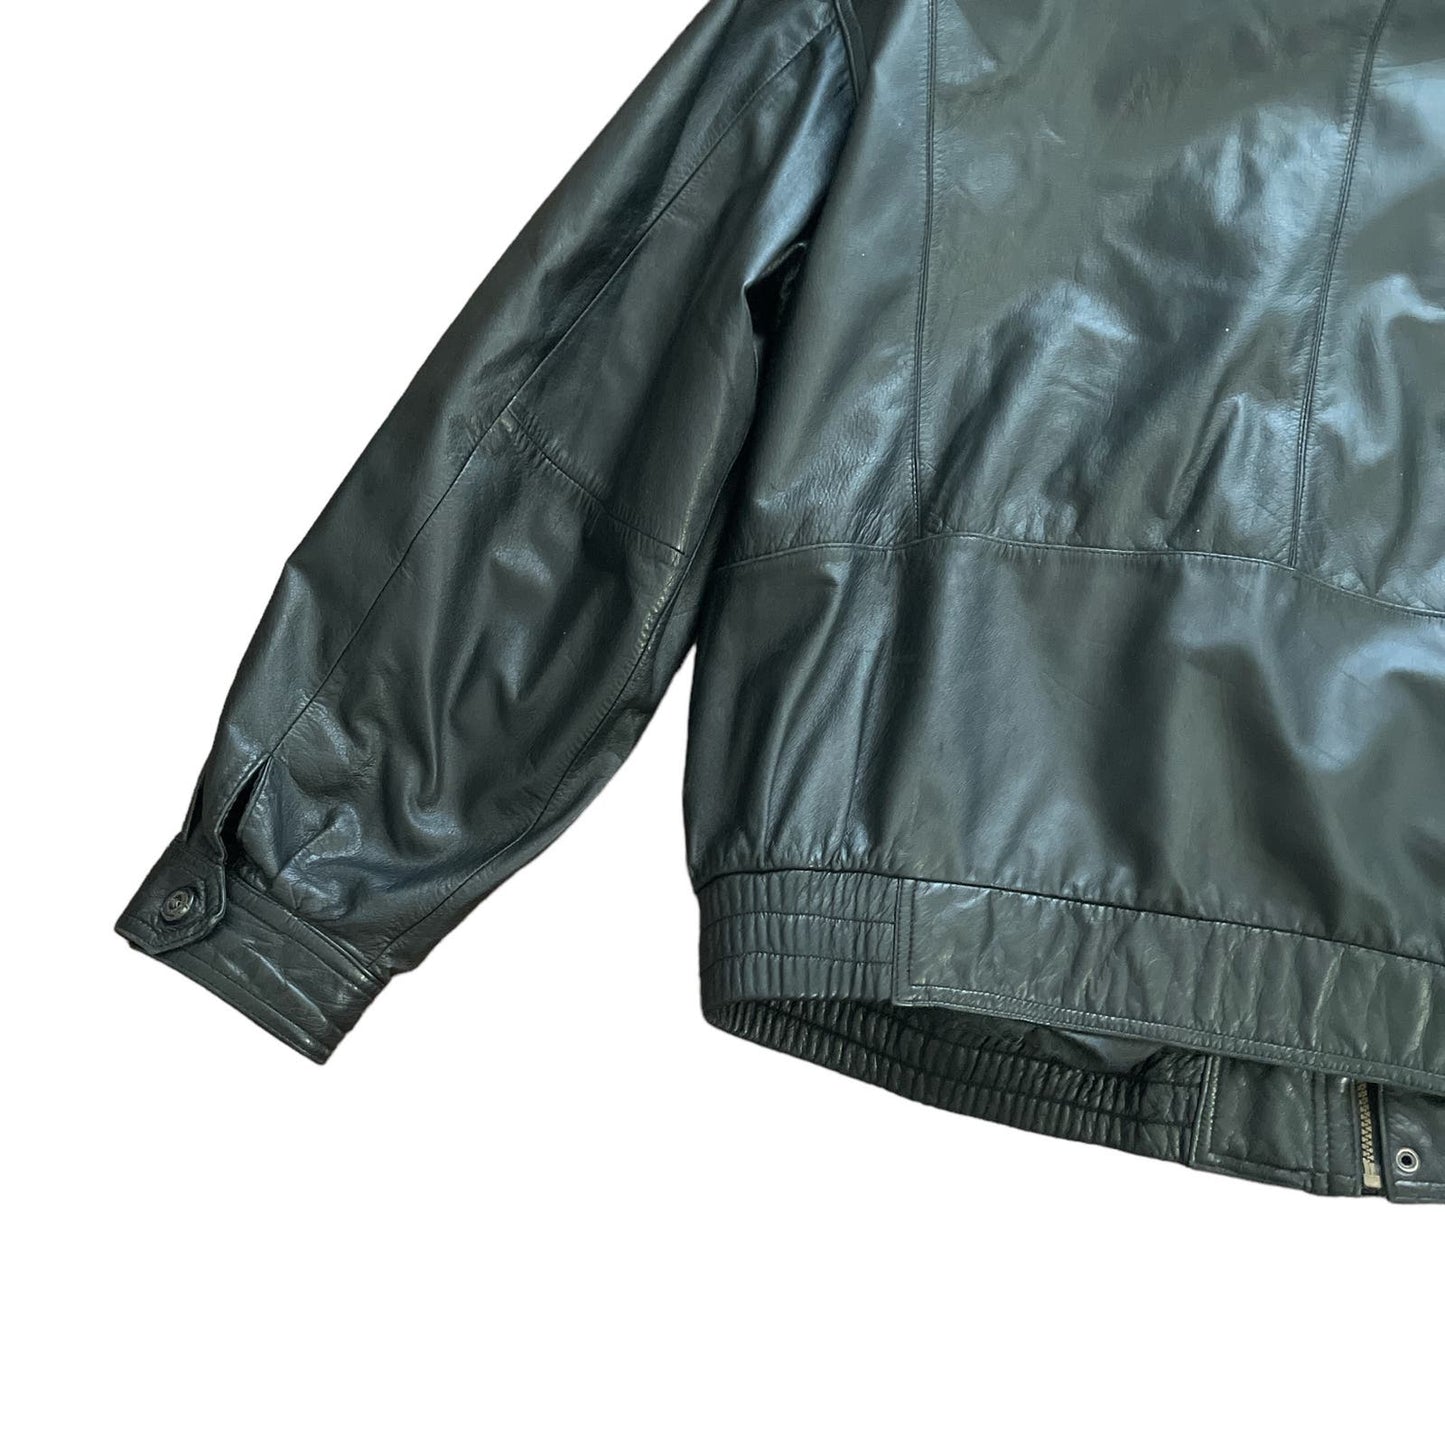 90s Members Only 100% Leather Black Heavyweight Coat 3X